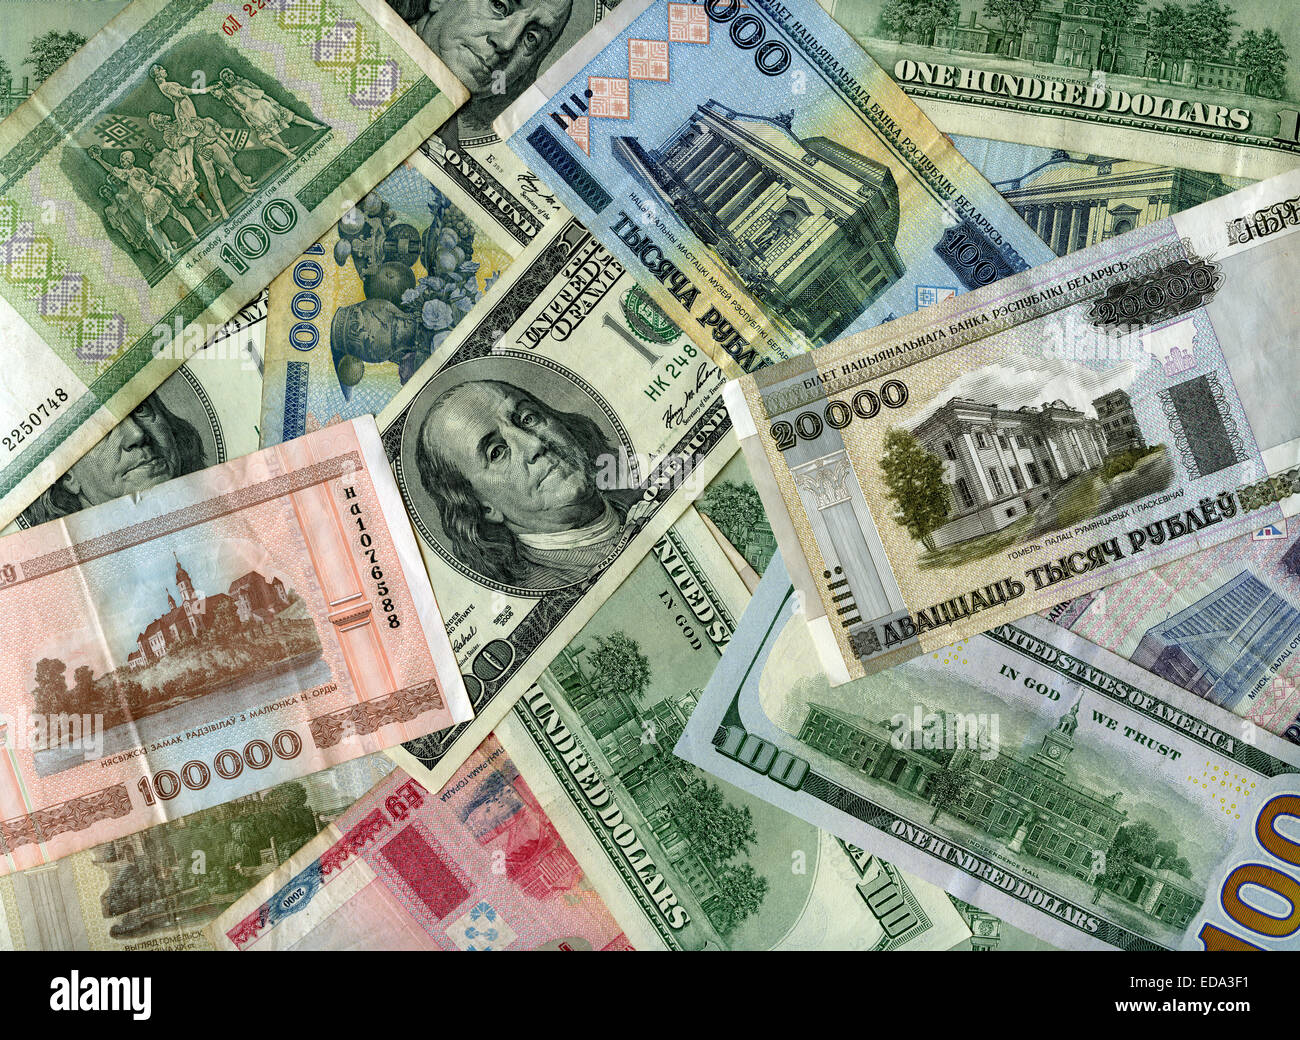 US dollars and Belarus banknotes (rubles) background Stock Photo